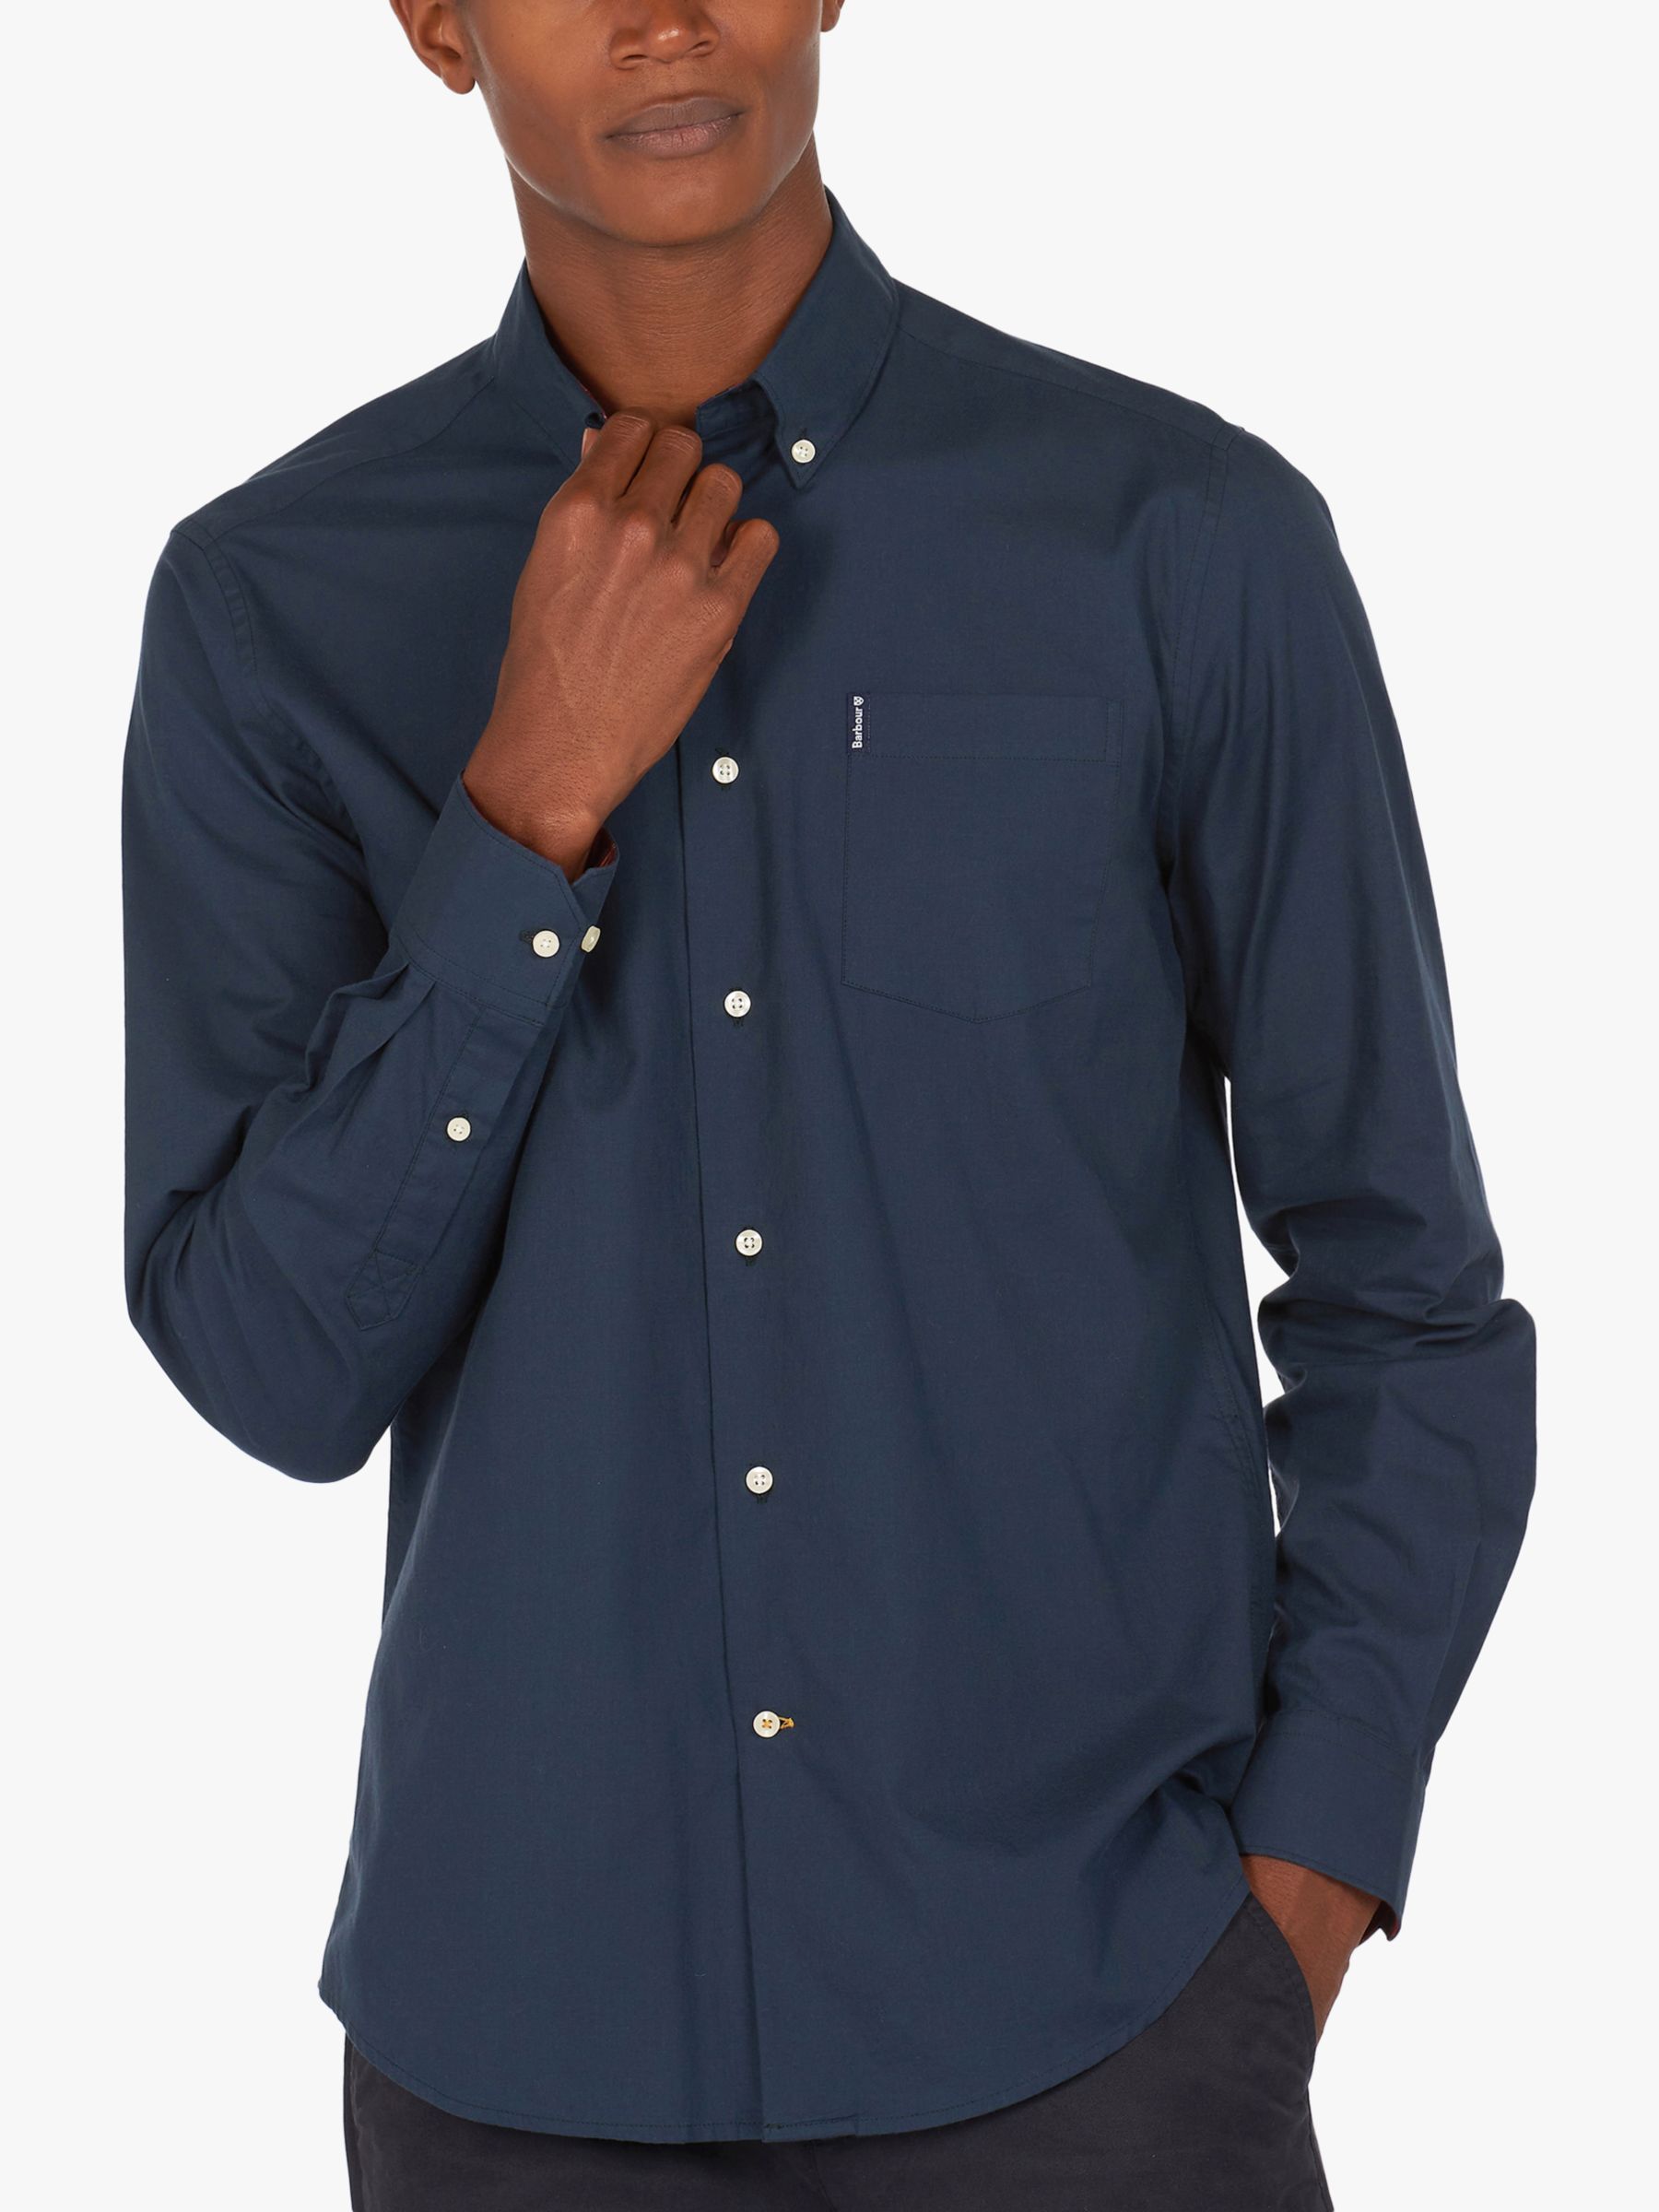 Barbour Lifestyle Cameron Tailored Button Down Collar Shirt, Navy